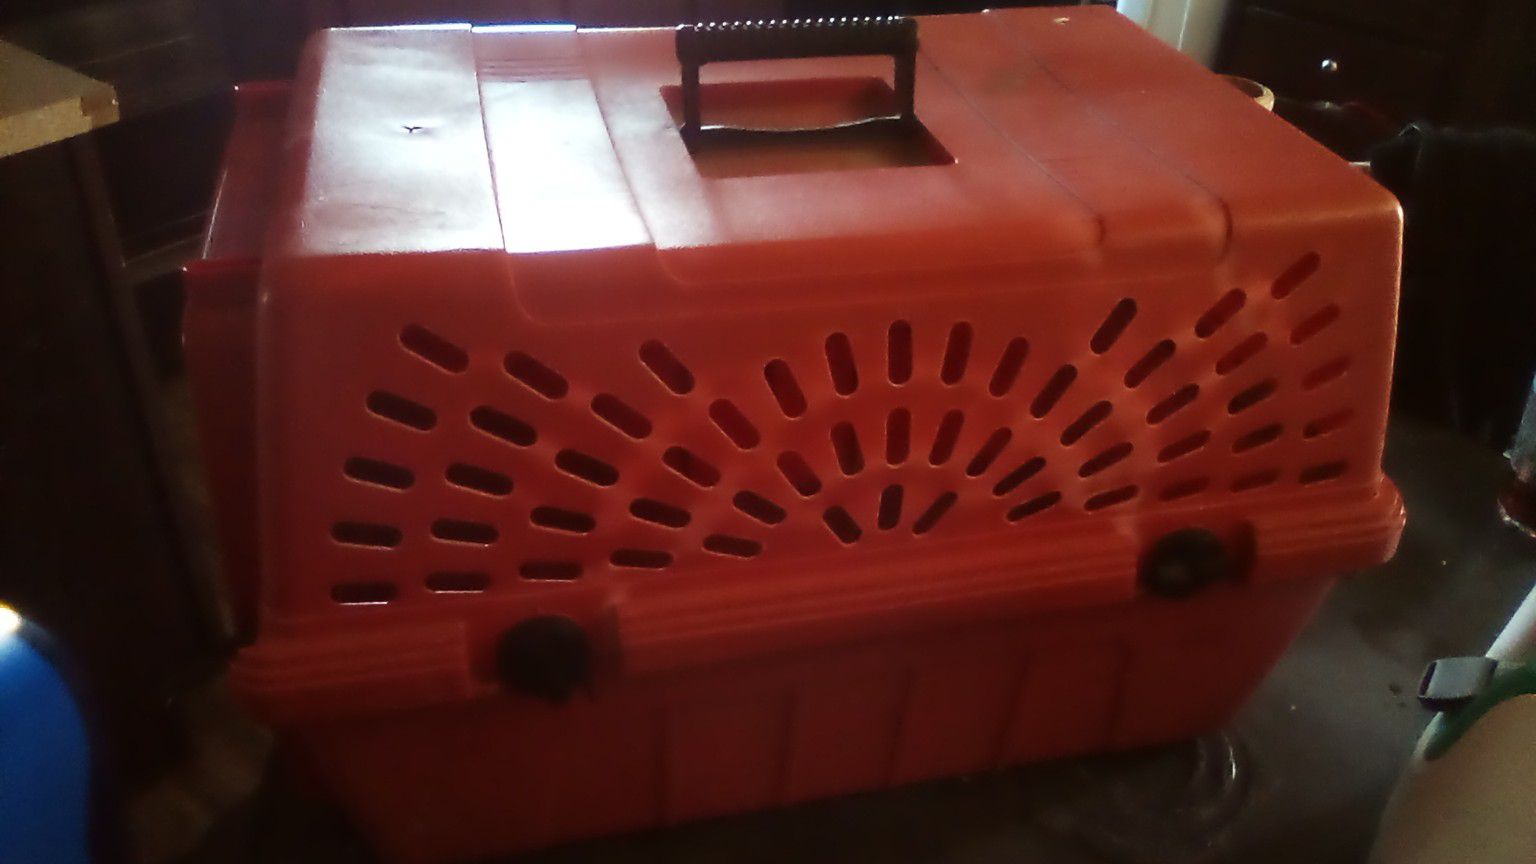 Medium-sized Red Dog Carrier